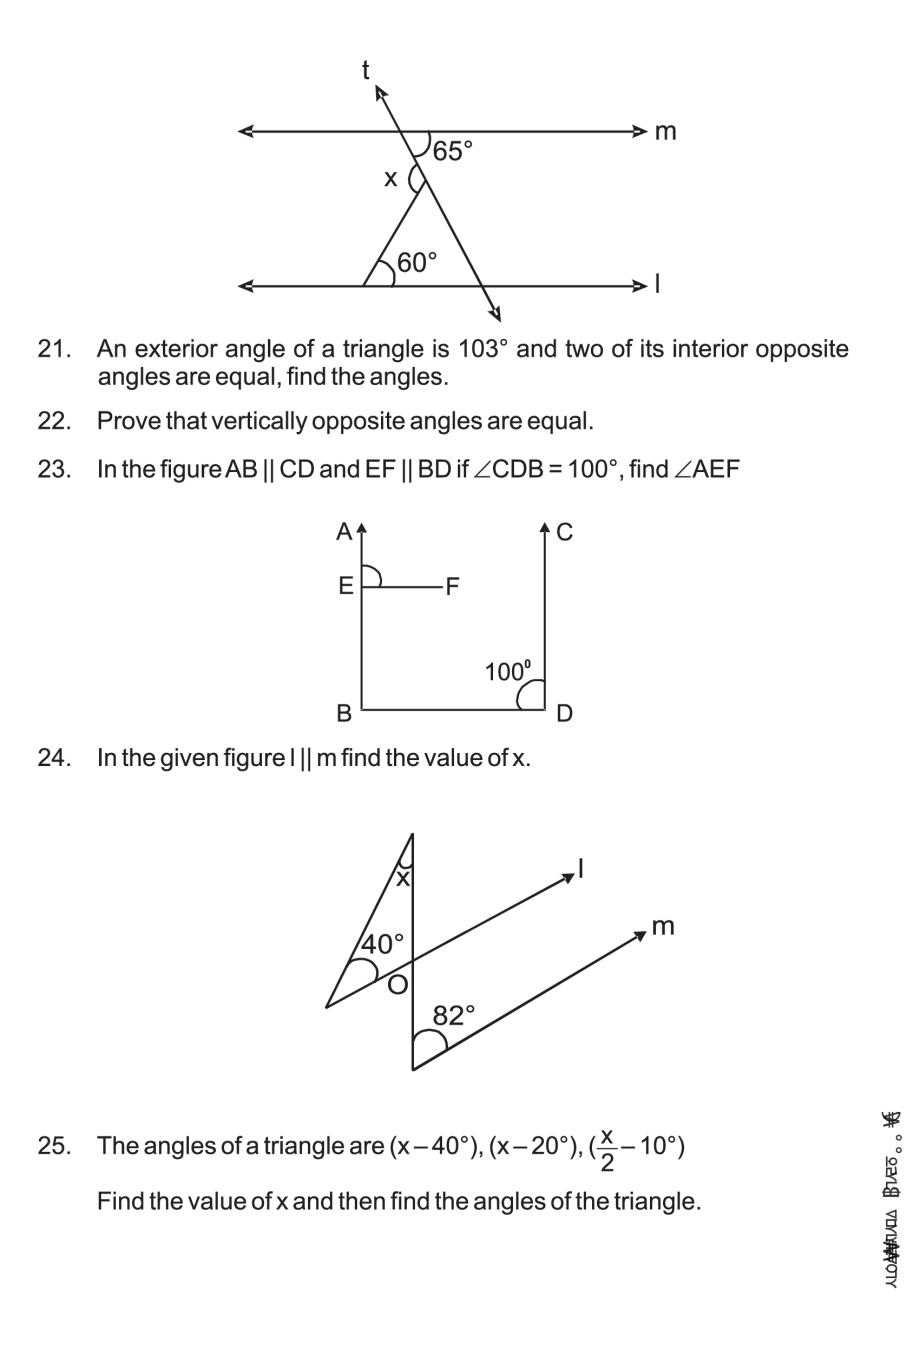 case study for class 9 maths lines and angles